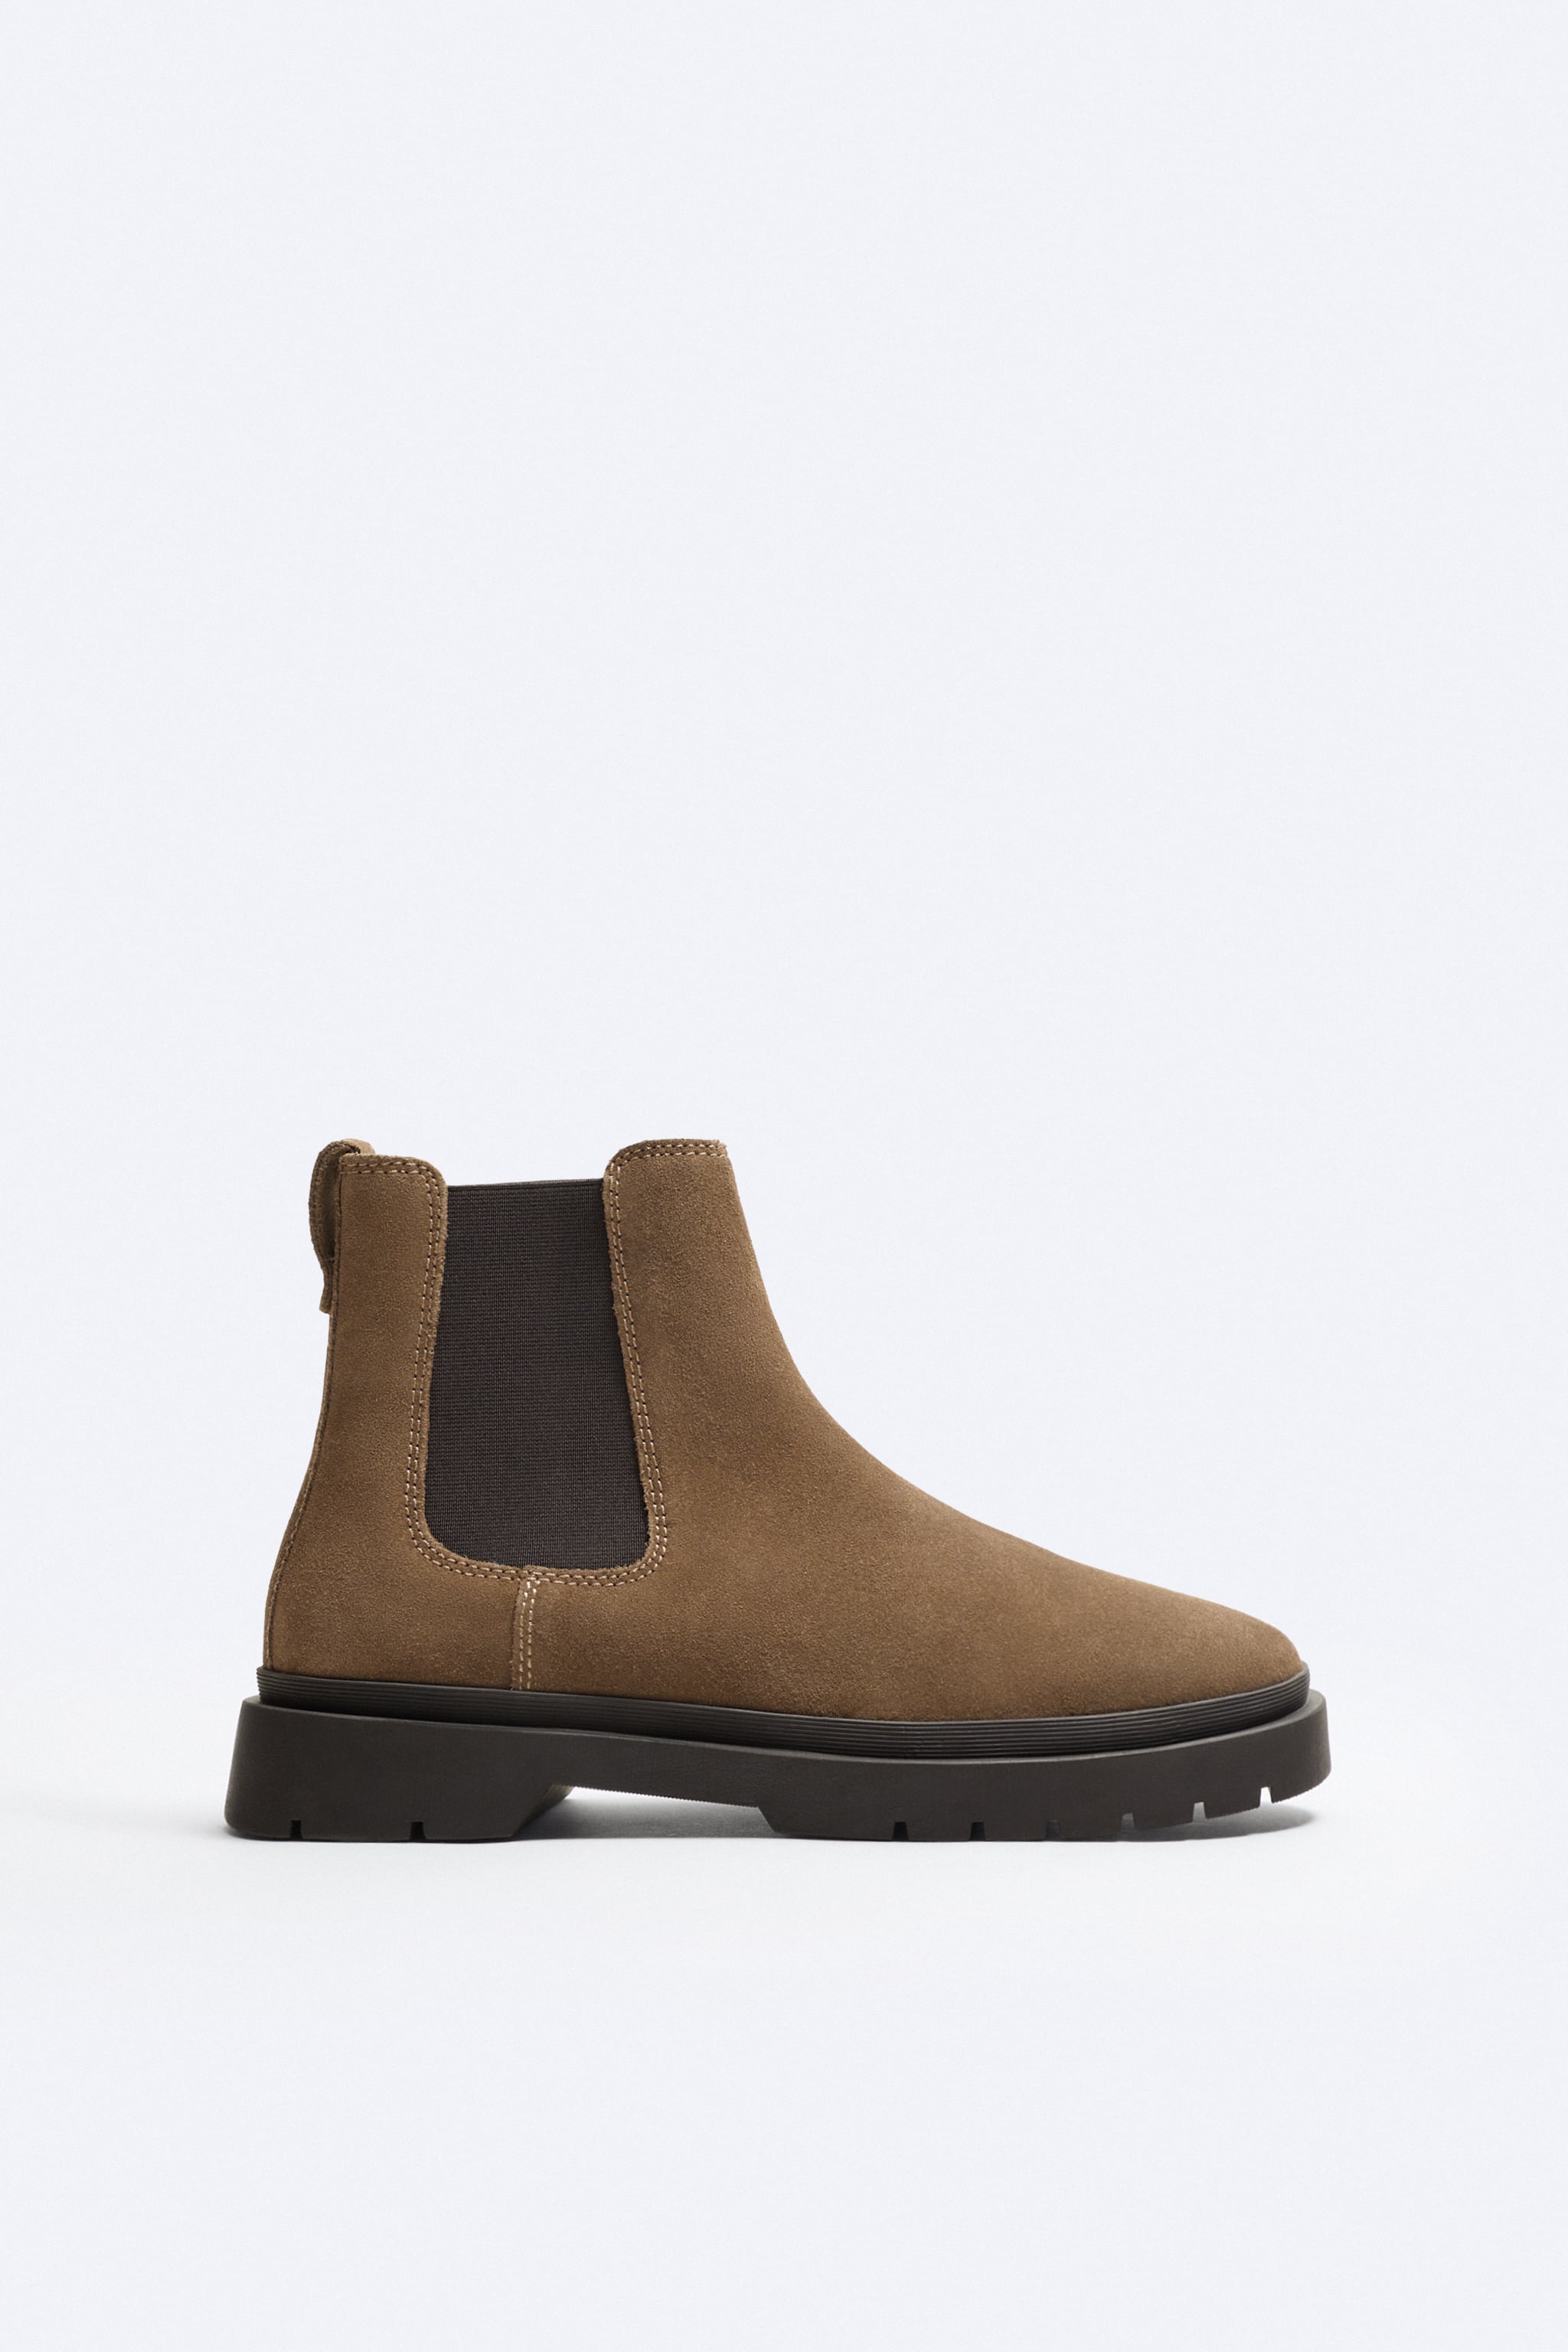 LUG SOLE SUEDE CHELSEA BOOTS